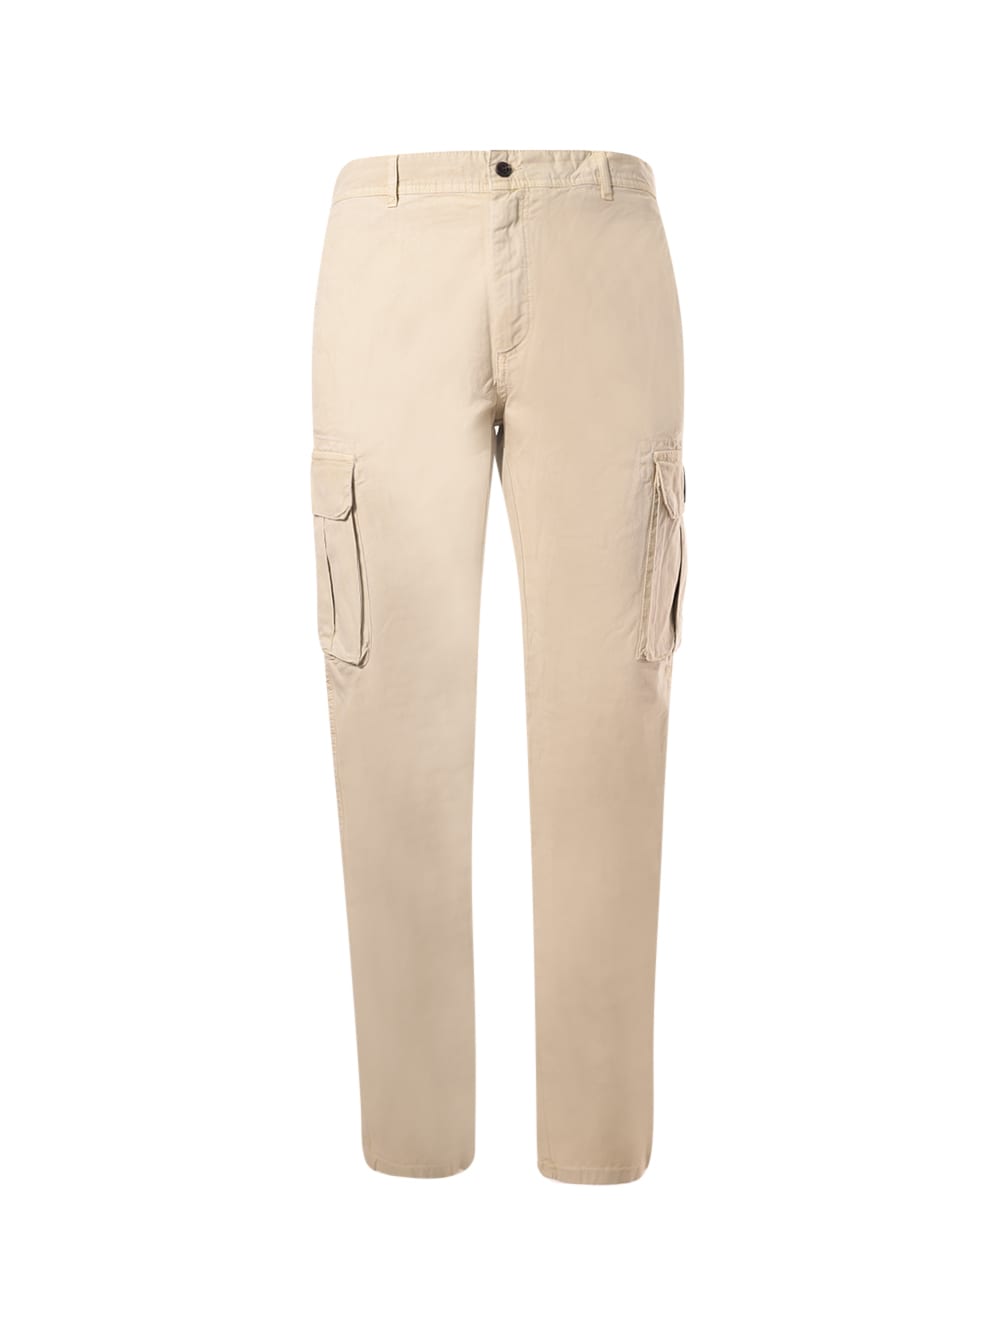 Shop Ecoalf Ecolaf Cargo Pants In Stone